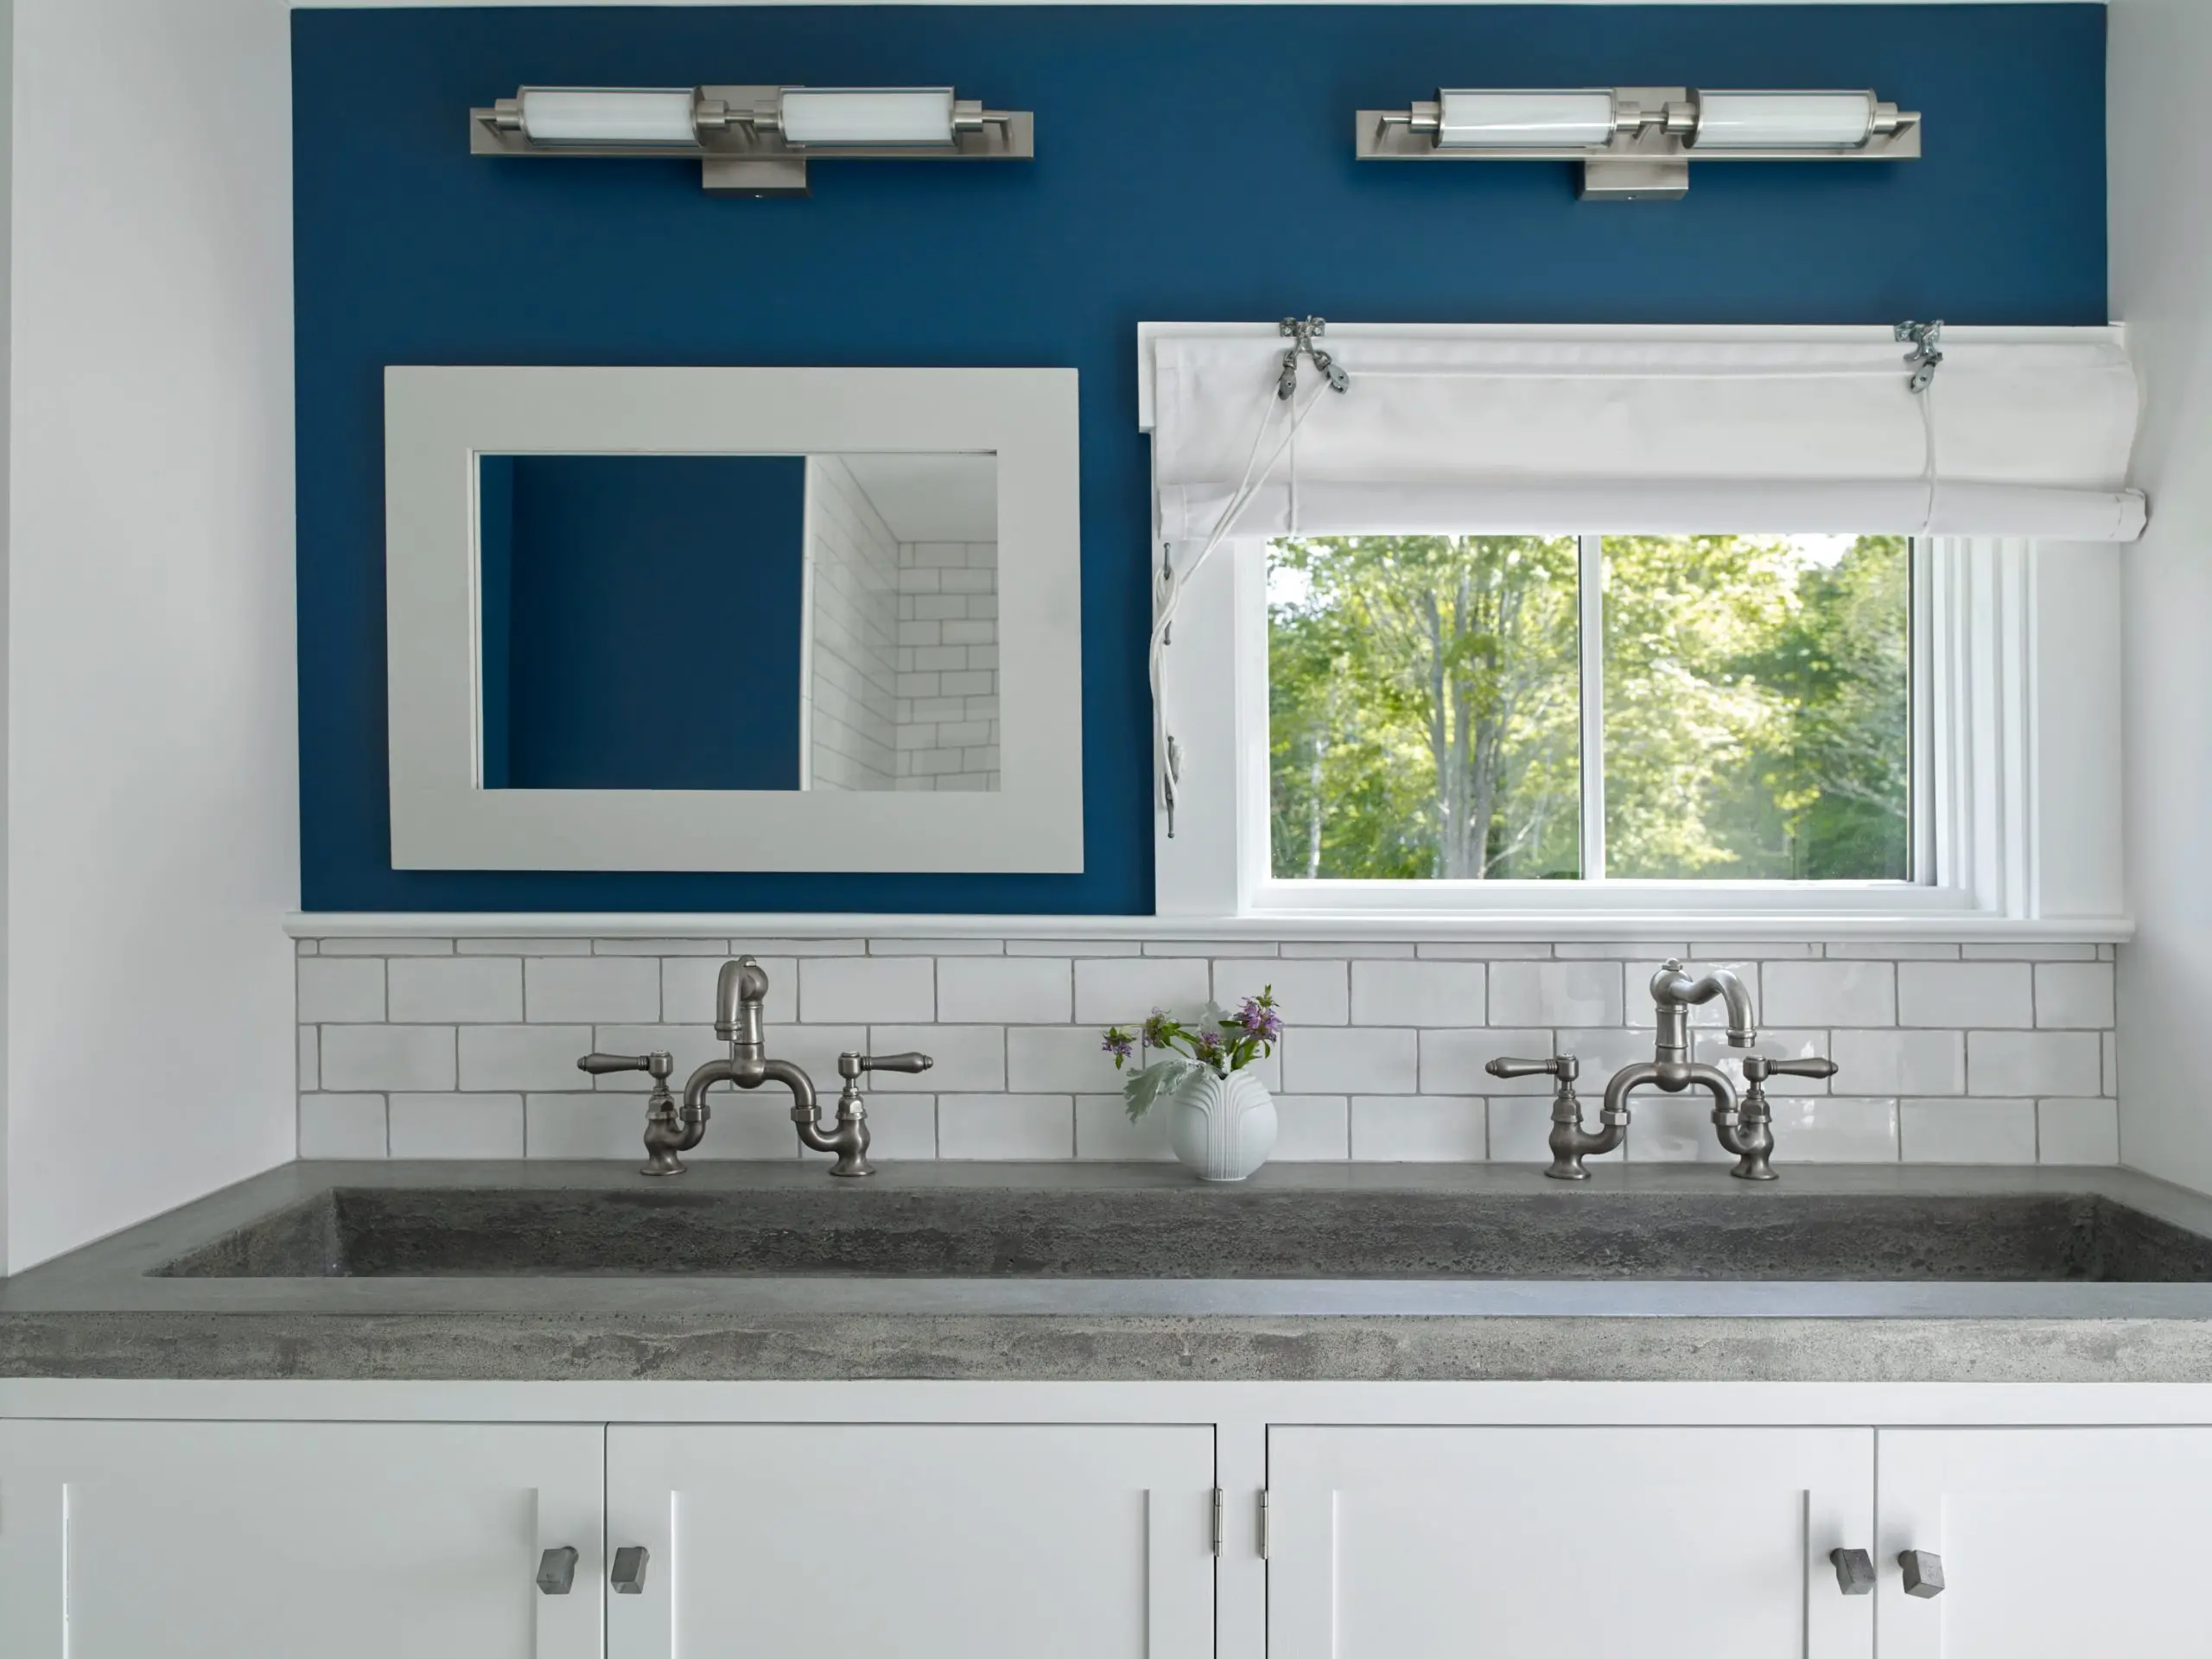 Double trough sink with beautiful contrast and navy blue accent wall.